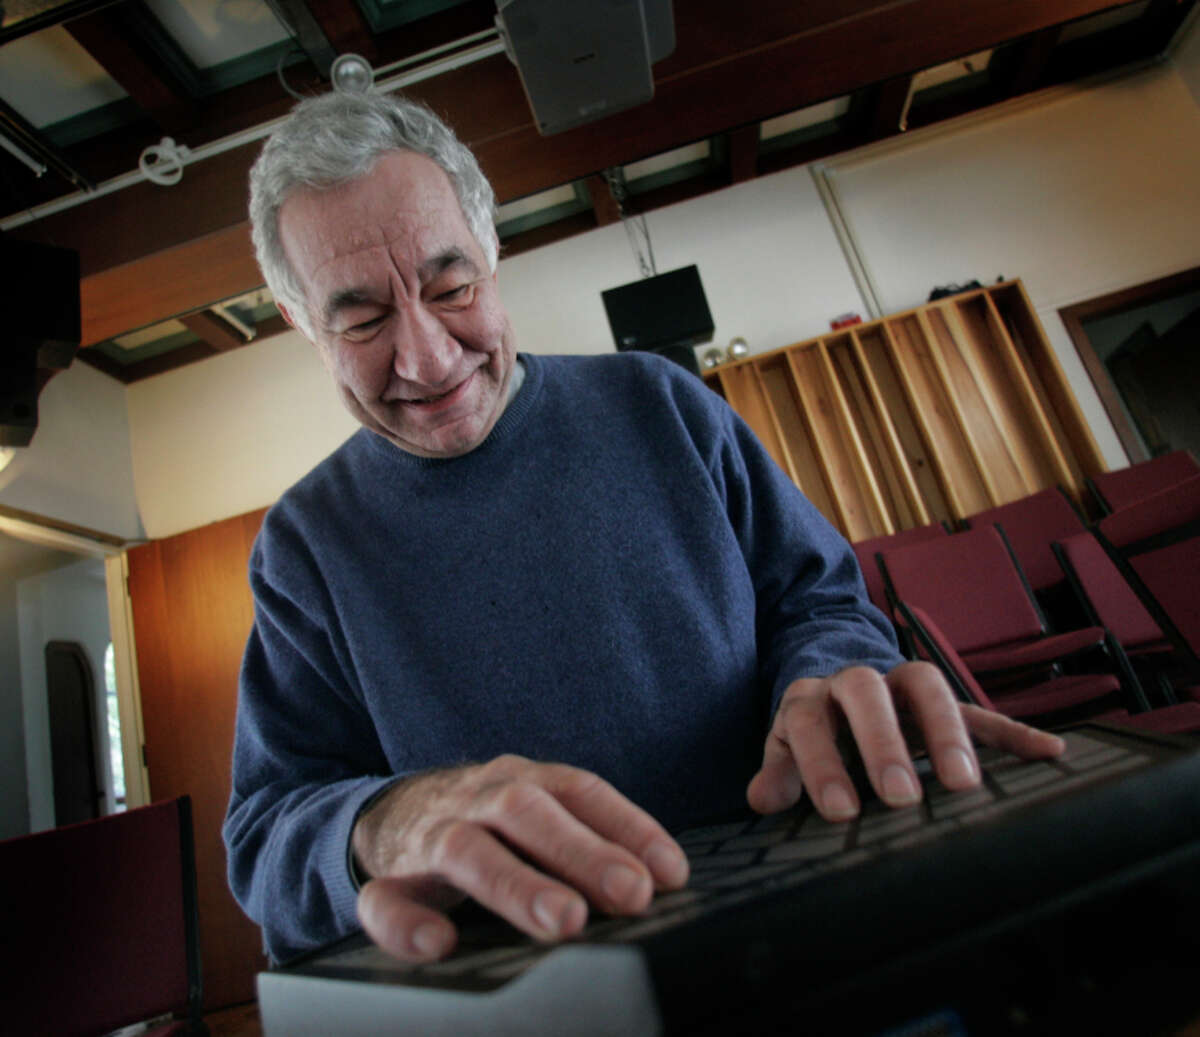 David Wessel was a music professor who also performed on electronic and computer systems.